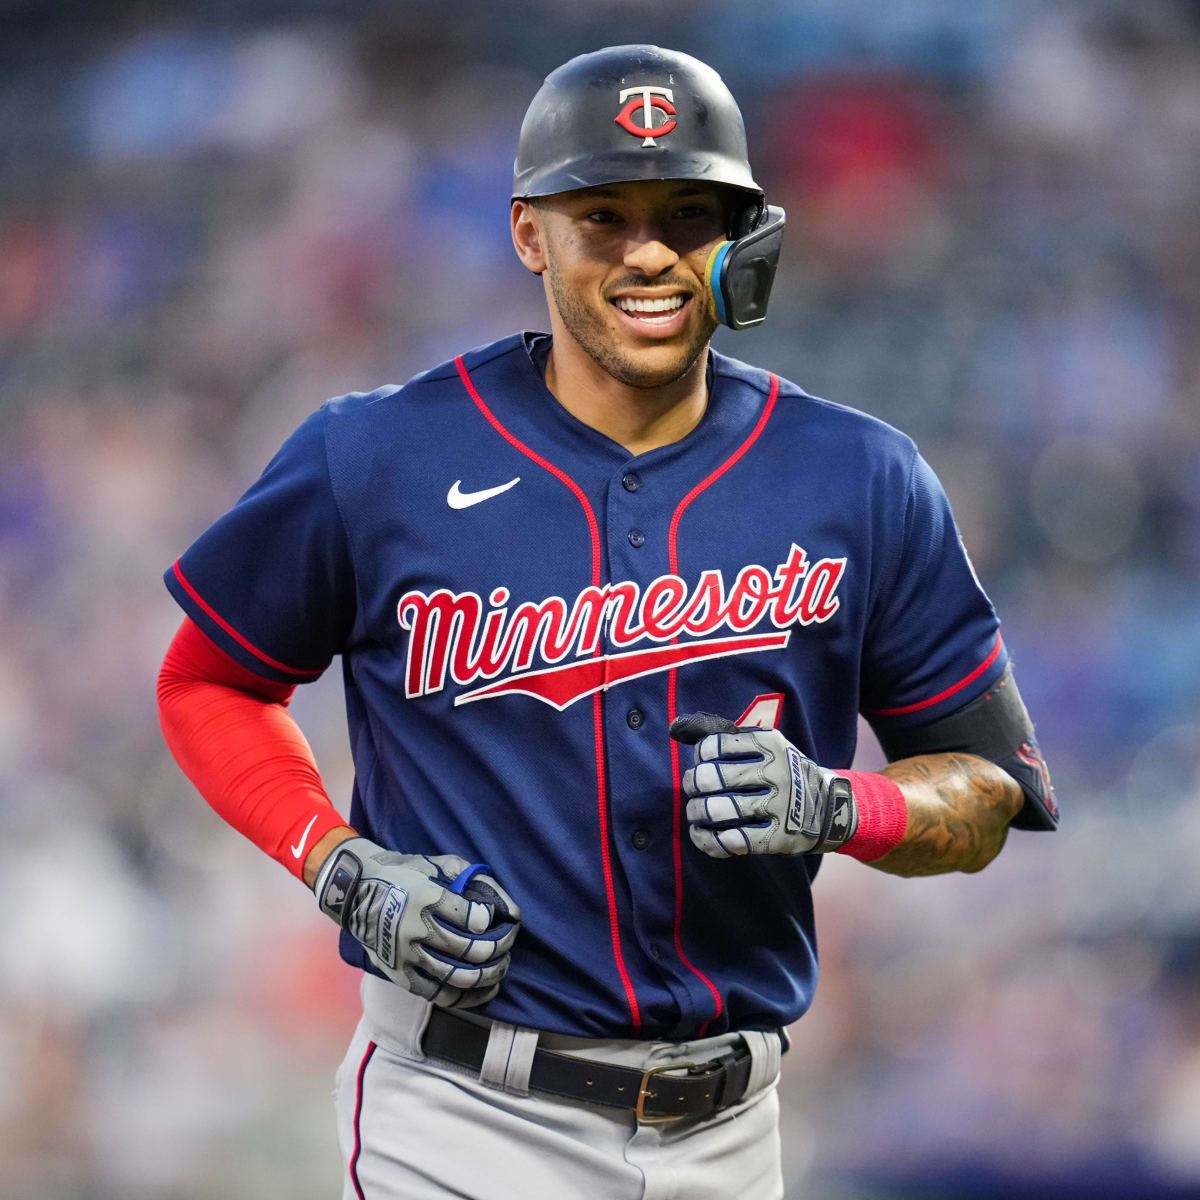 Twins: What can we expect from Alex Kirilloff in 2022? - Let's